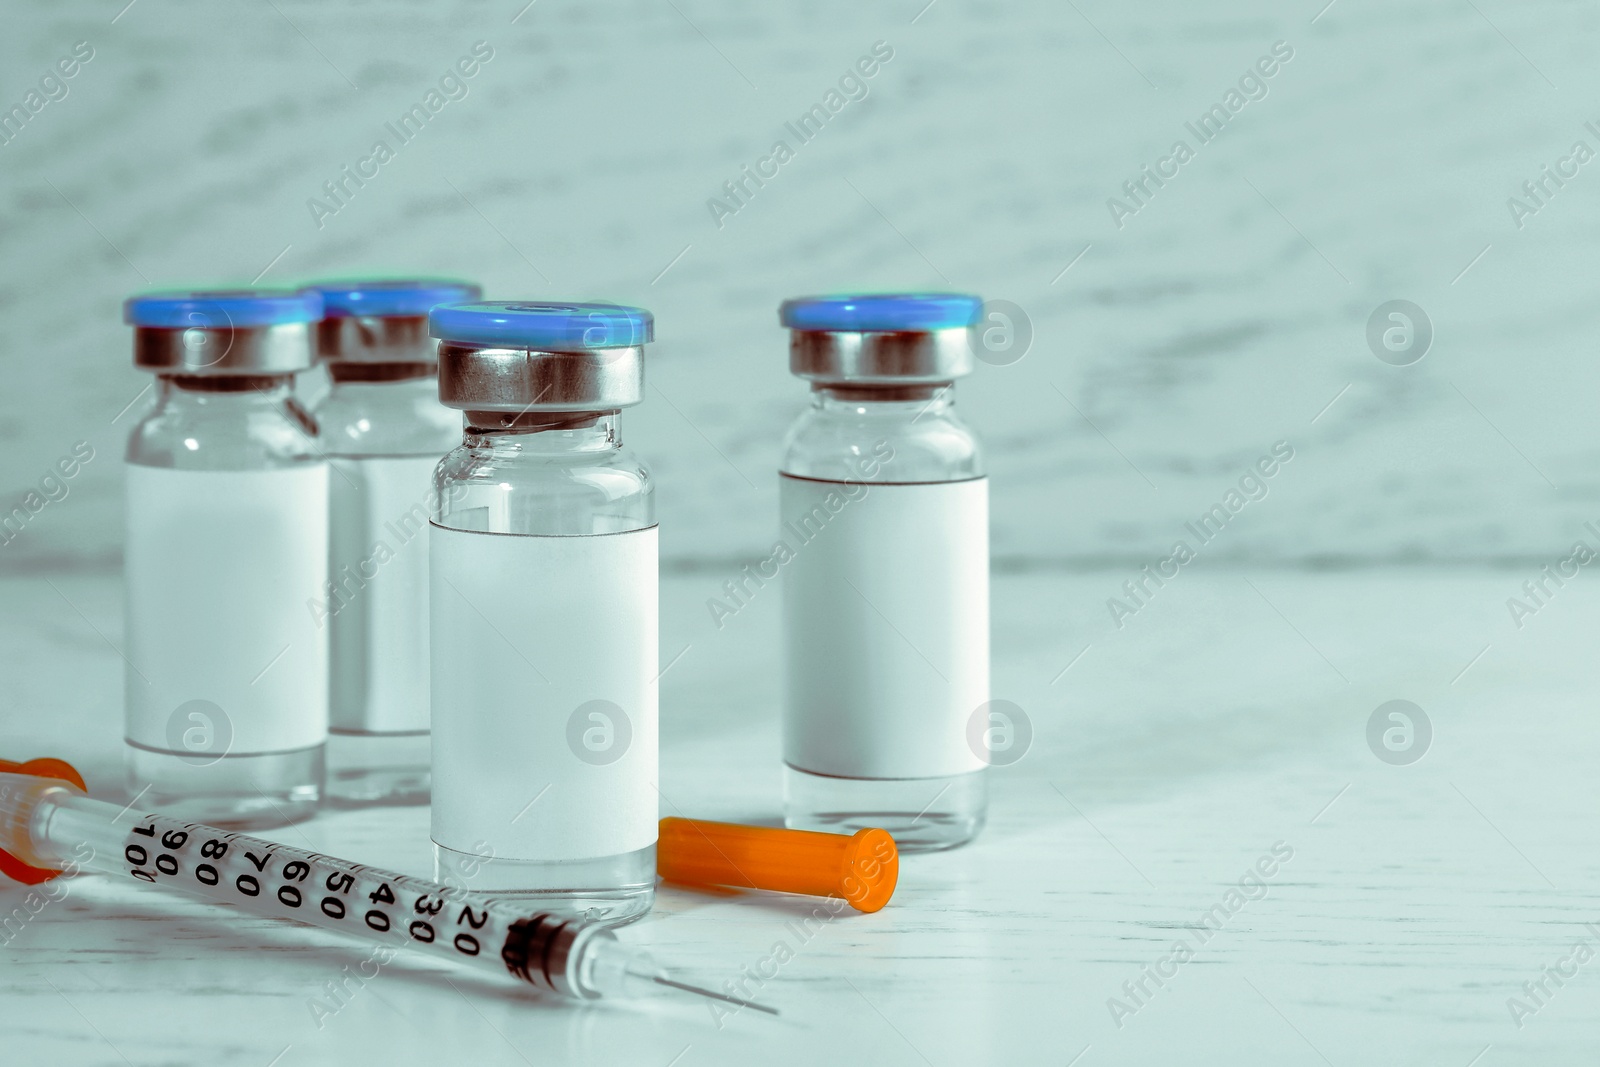 Image of Medication in glass vials and syringe on white wooden table, space for text